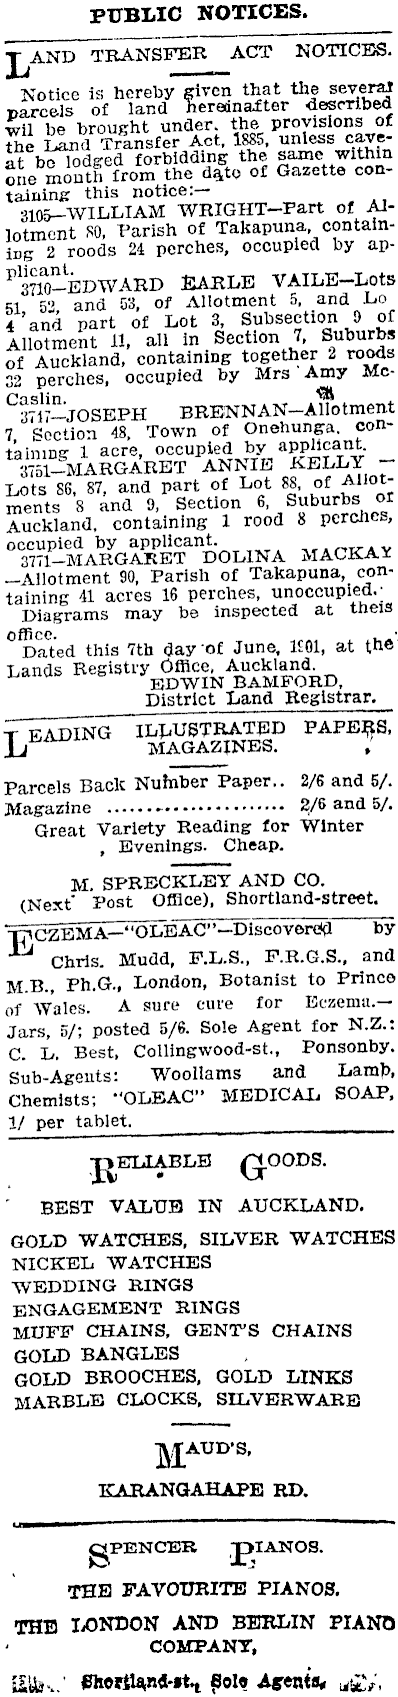 Papers Past Newspapers Auckland Star 11 June 1901 Page 8 Advertisements Column 1